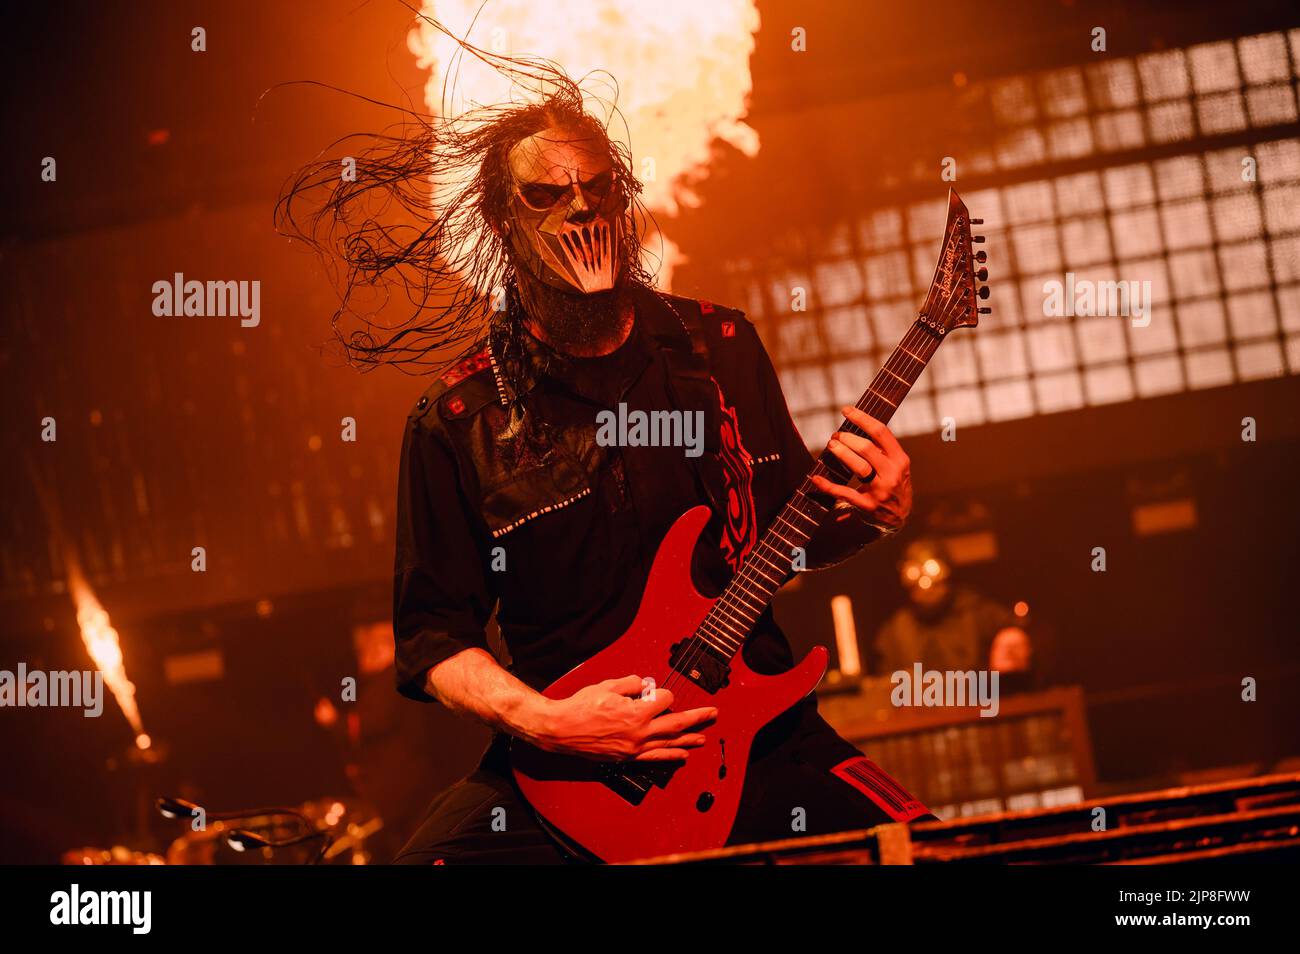 Malmoe, Sweden. 15th Aug, 2022. The American heavy metal band Slipknot performs a live concert at Malmö Arena in Malmoe. Here guitarist Mick Thomson is seen live on stage. (Photo Credit: Gonzales Photo/Alamy Live News Stock Photo